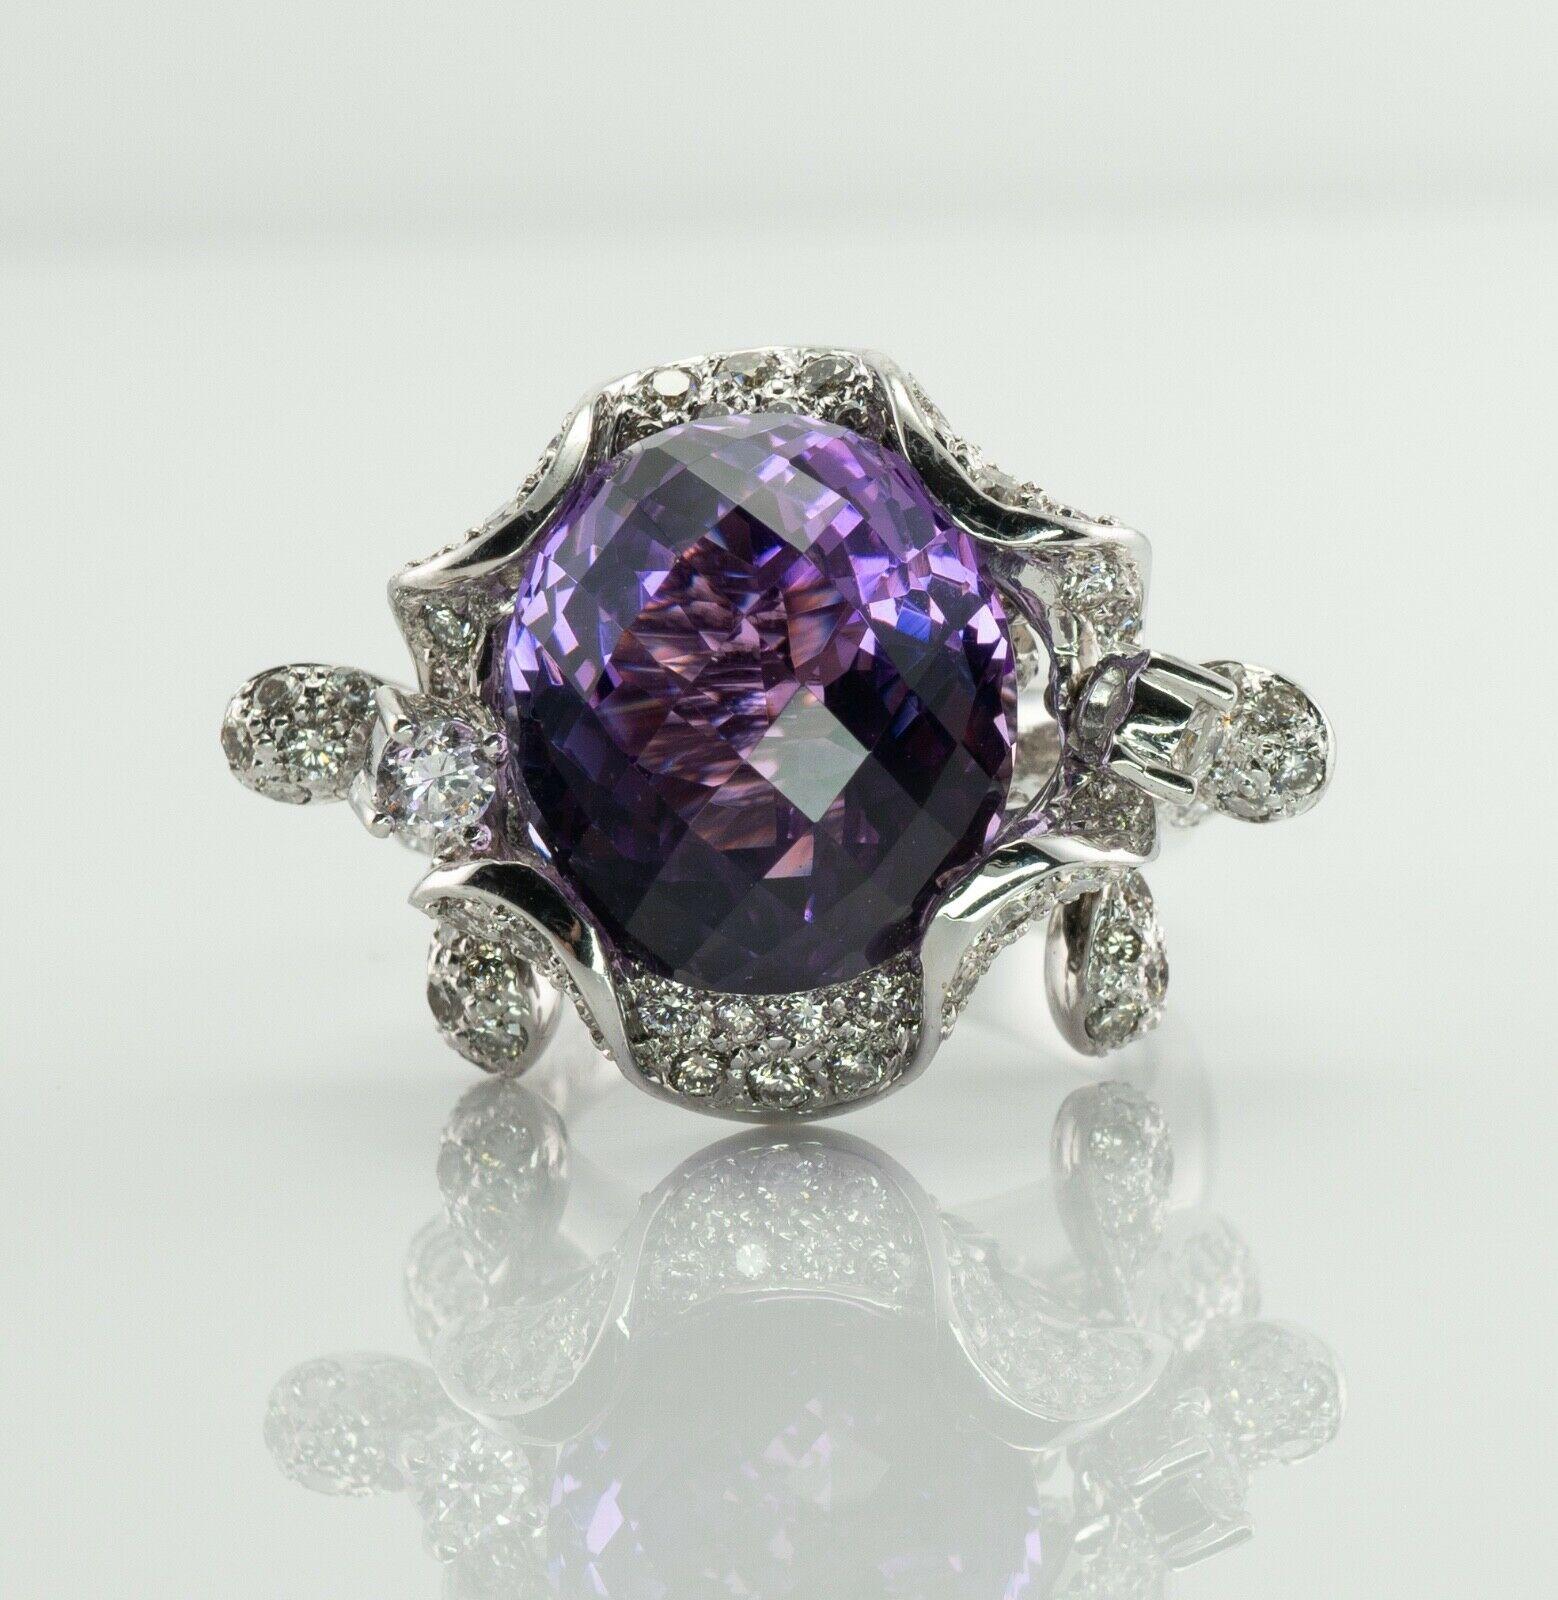 This amazing large and spectacular ring is crafted in solid 18K White Gold. The center natural checkerboard cut Amethyst measures 15mm x 13mm = 10.28cts. This is a very clean gem of great intensity. The ring is studded with natural diamonds. The